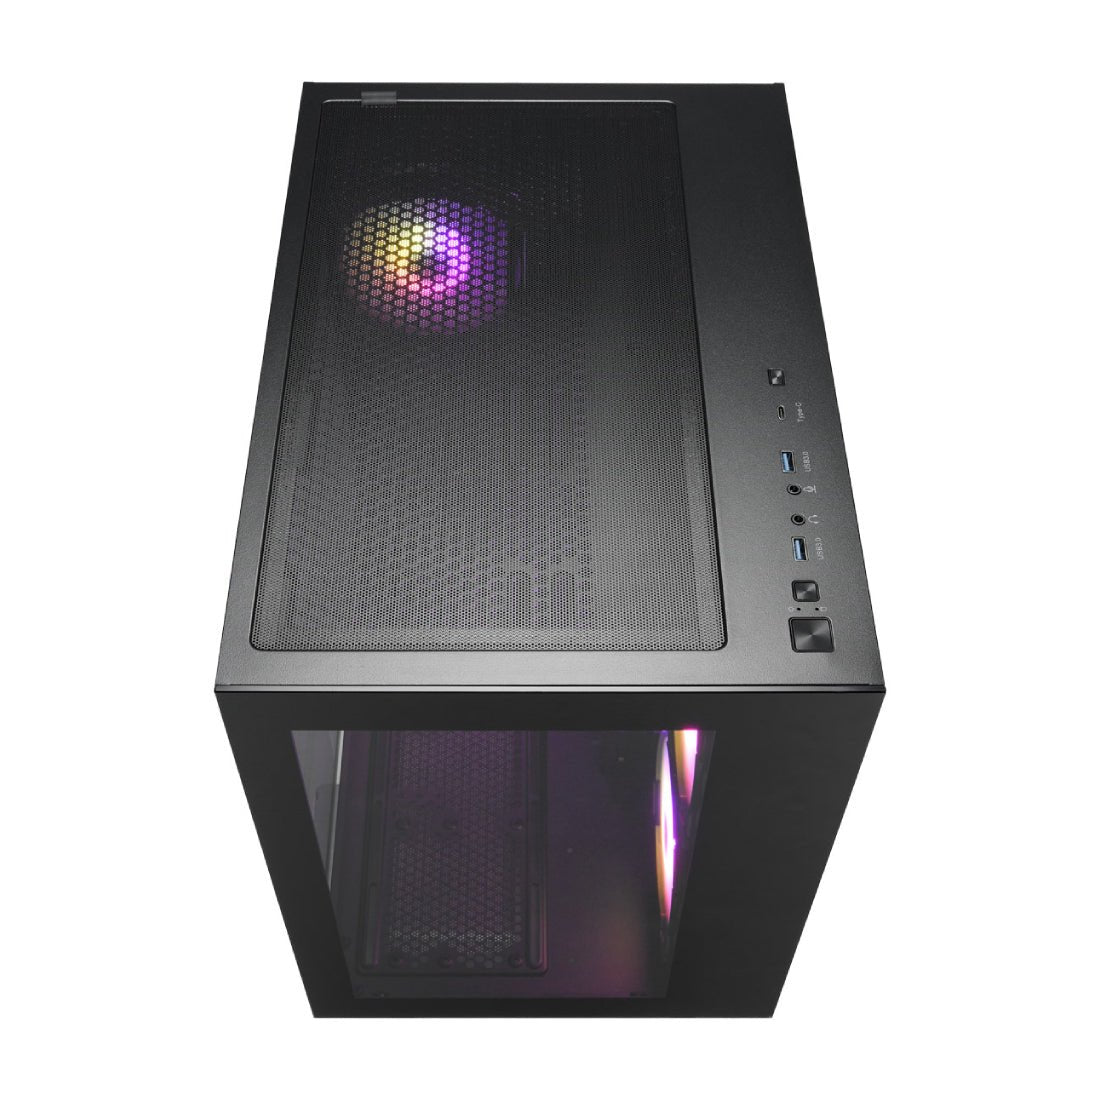 FSP CMT380A ATX Mid Tower Case - Black - صندوق - Store 974 | ستور ٩٧٤